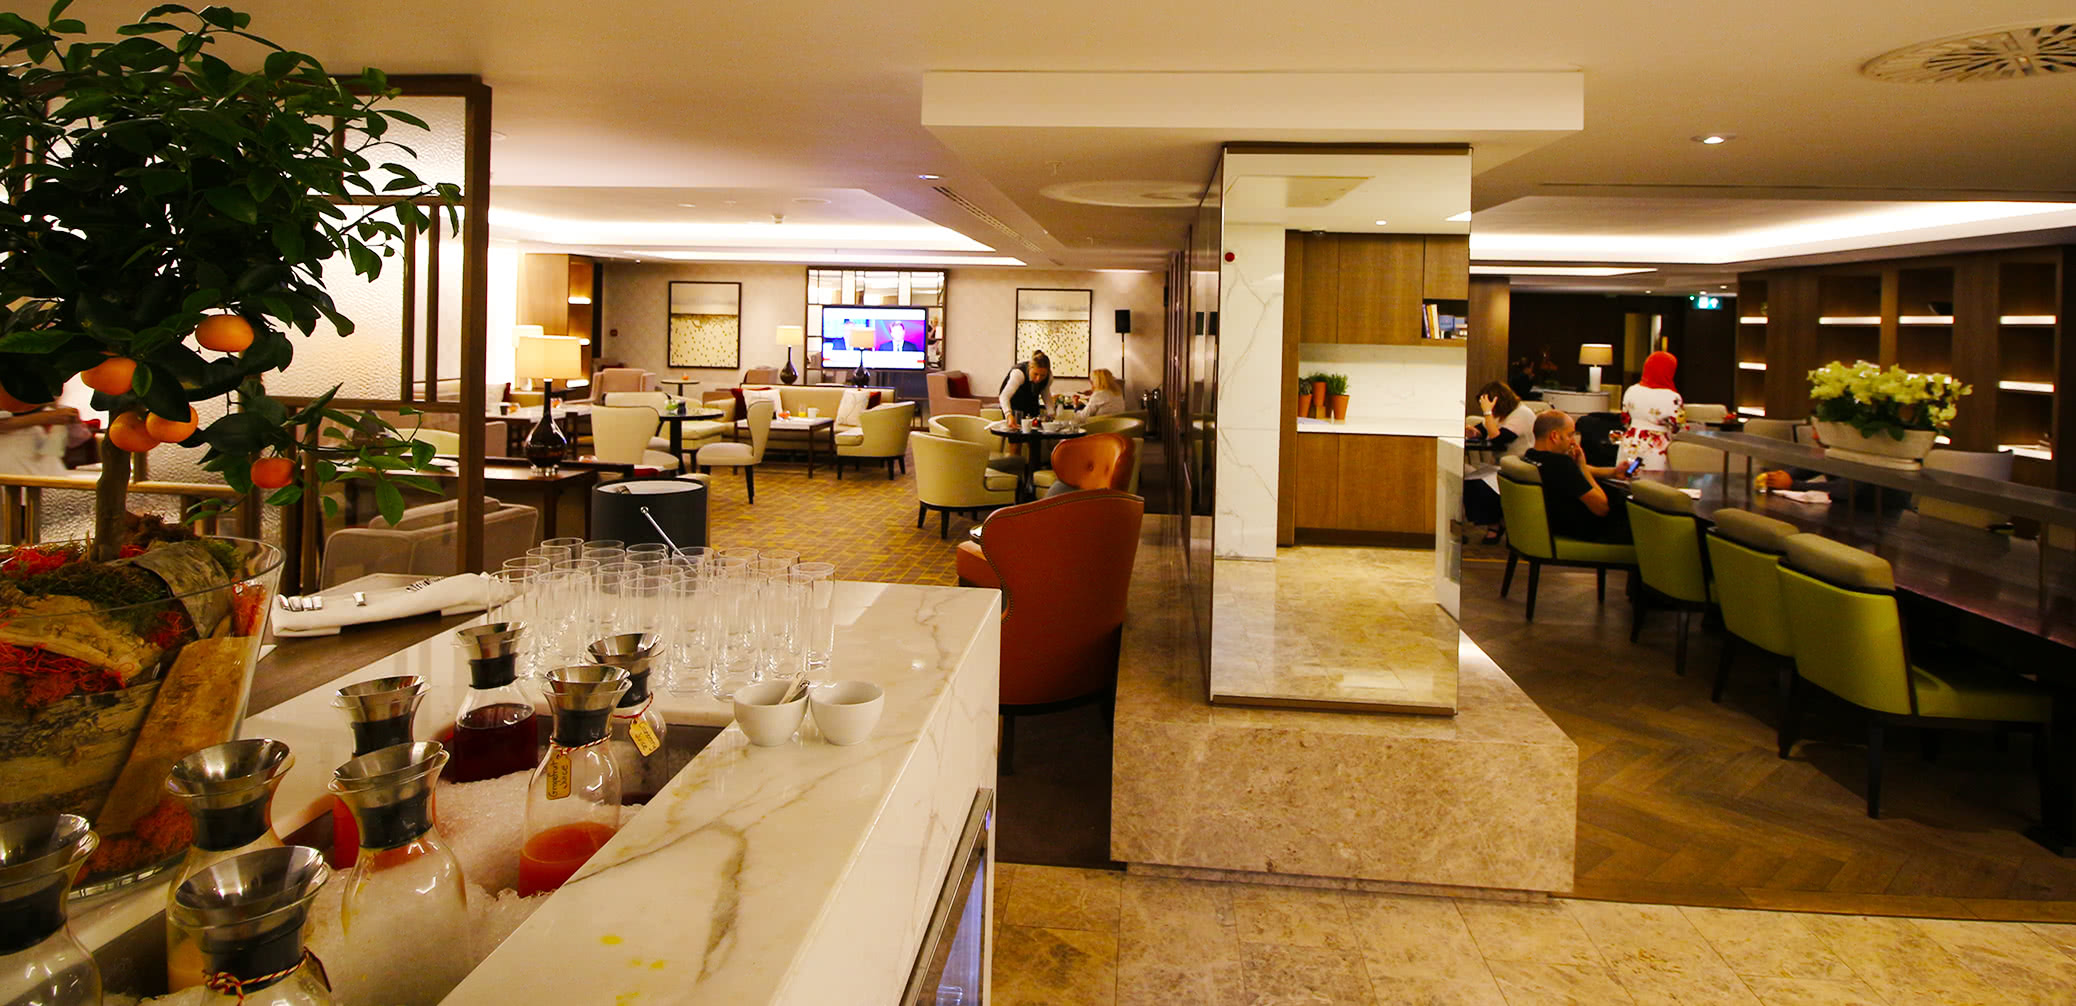 Best Hotel Executive Club Lounges In Israel